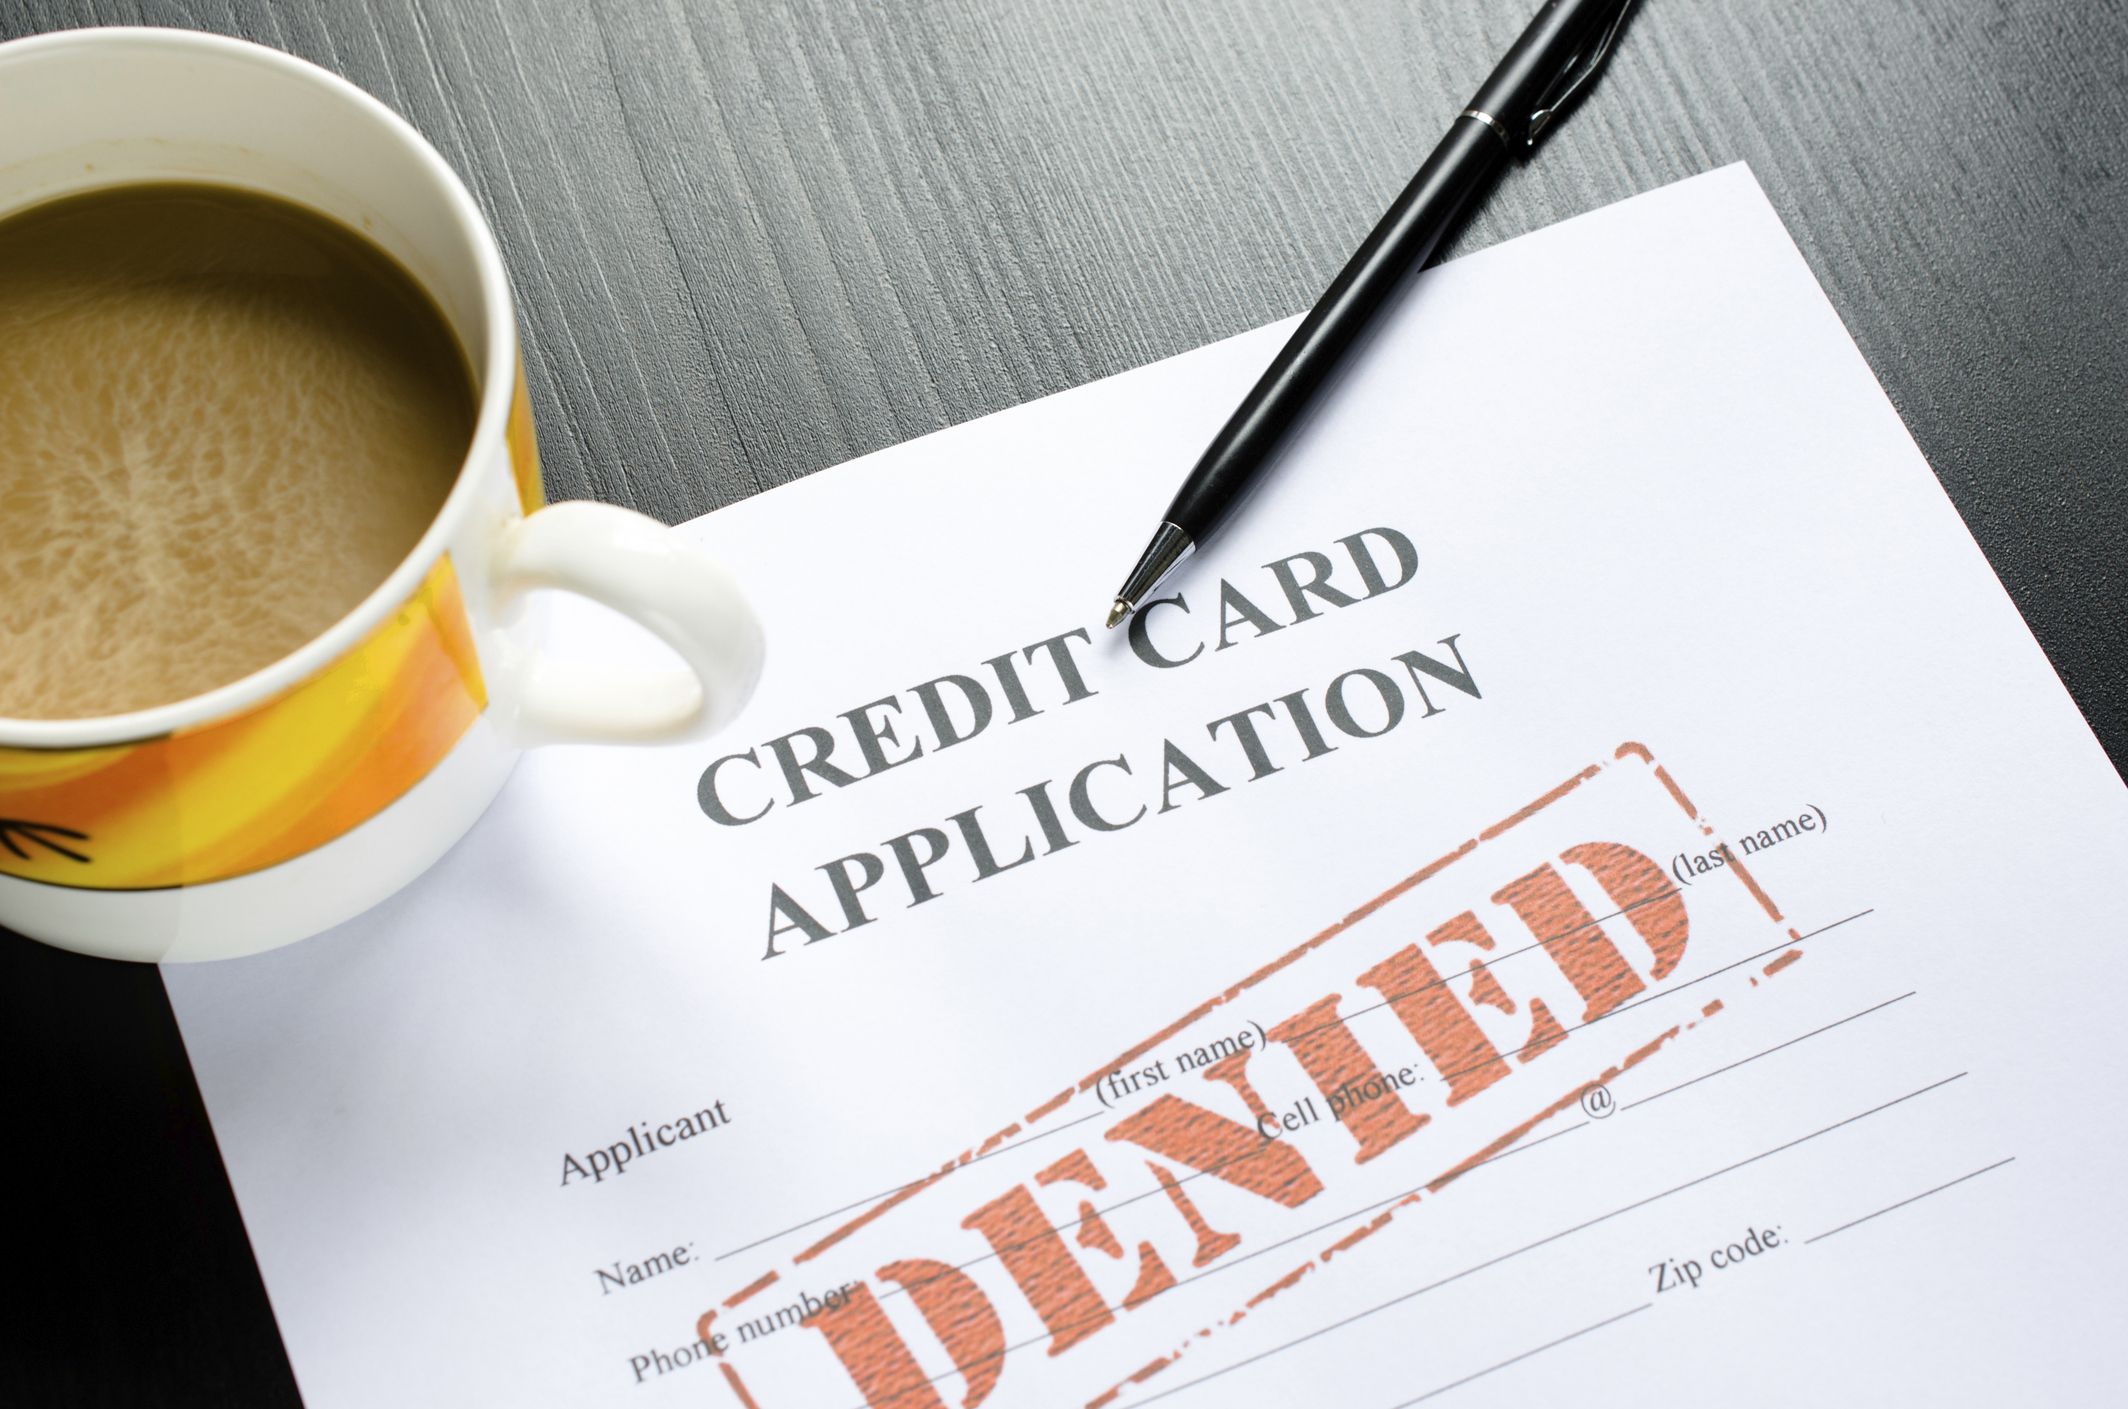 Denied application based on your credit